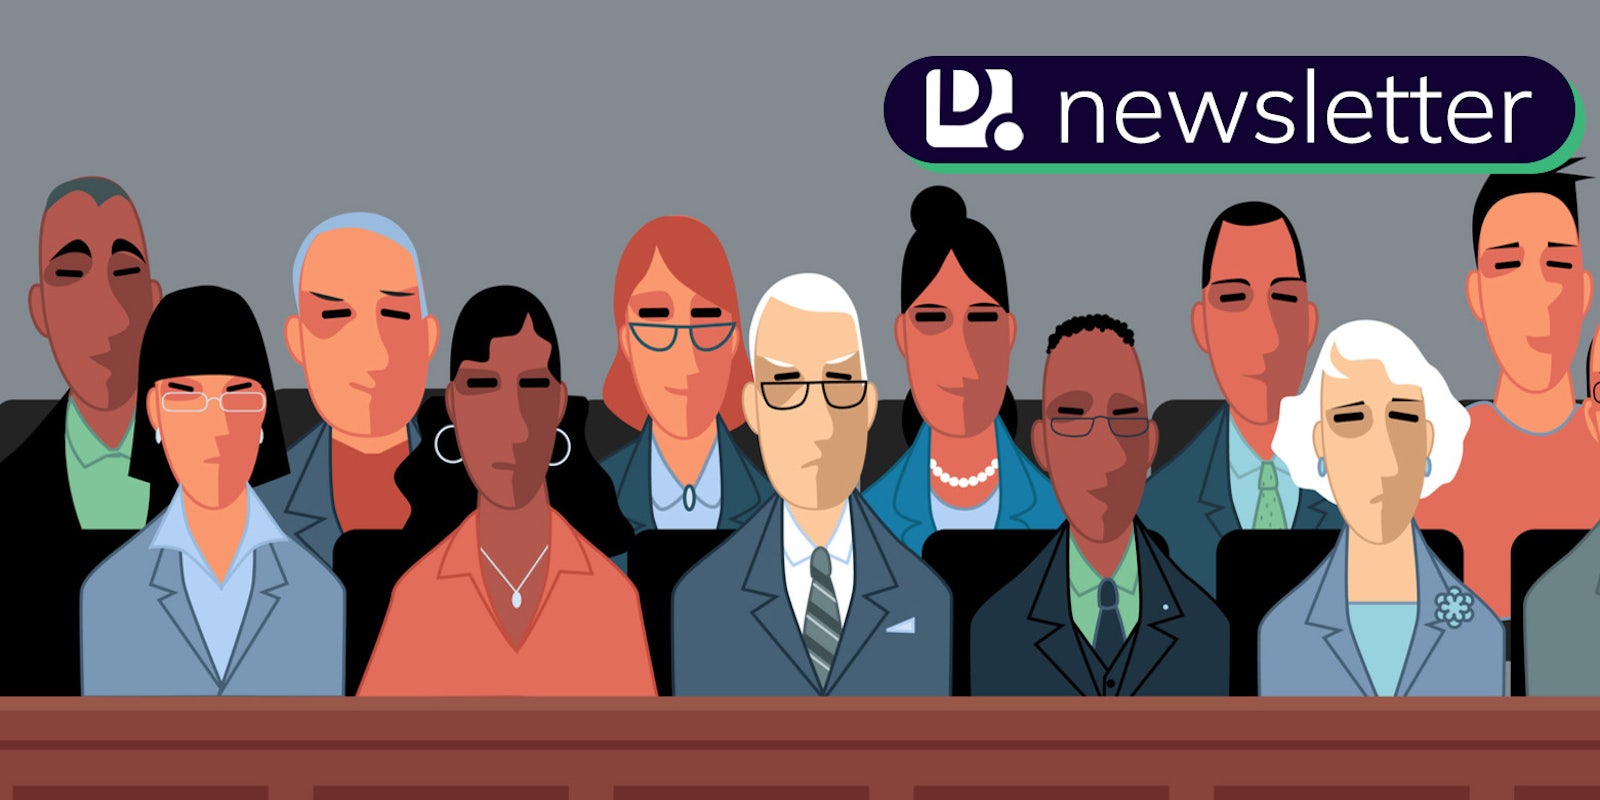 A cartoon of a jury. The Daily Dot newsletter logo is in the top right corner.